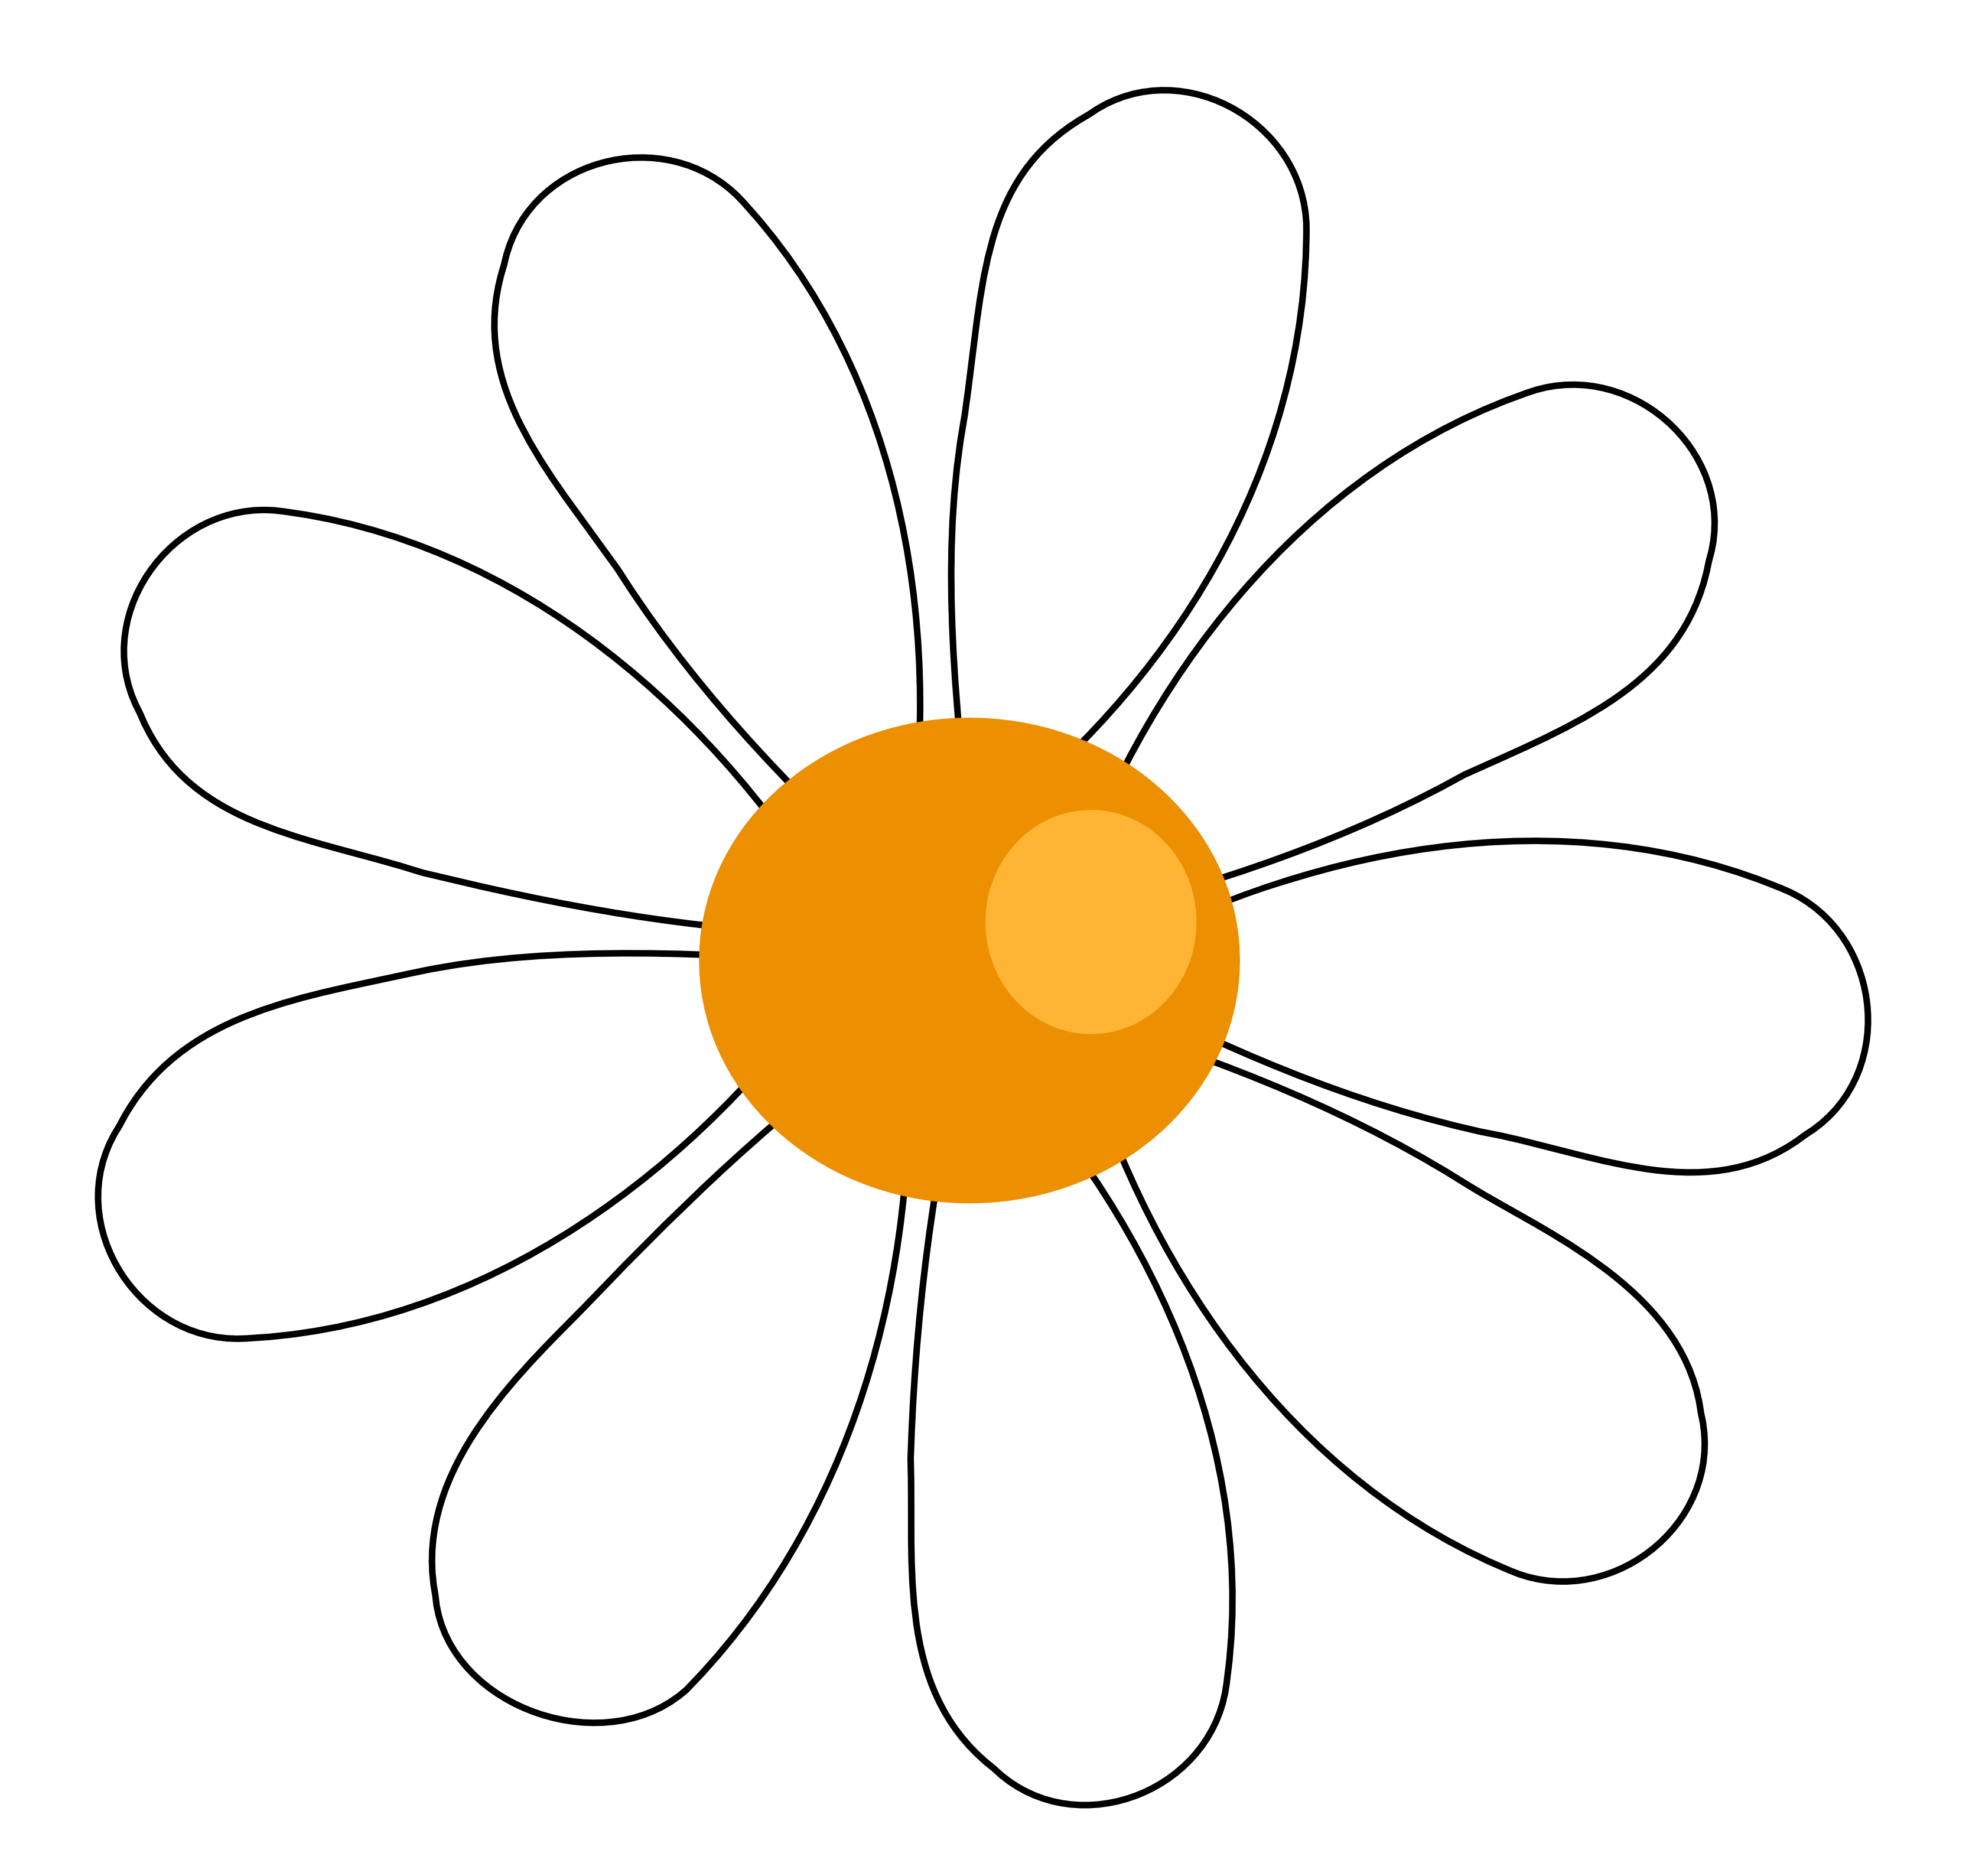 Daisy Images Clip Art - Clipart library